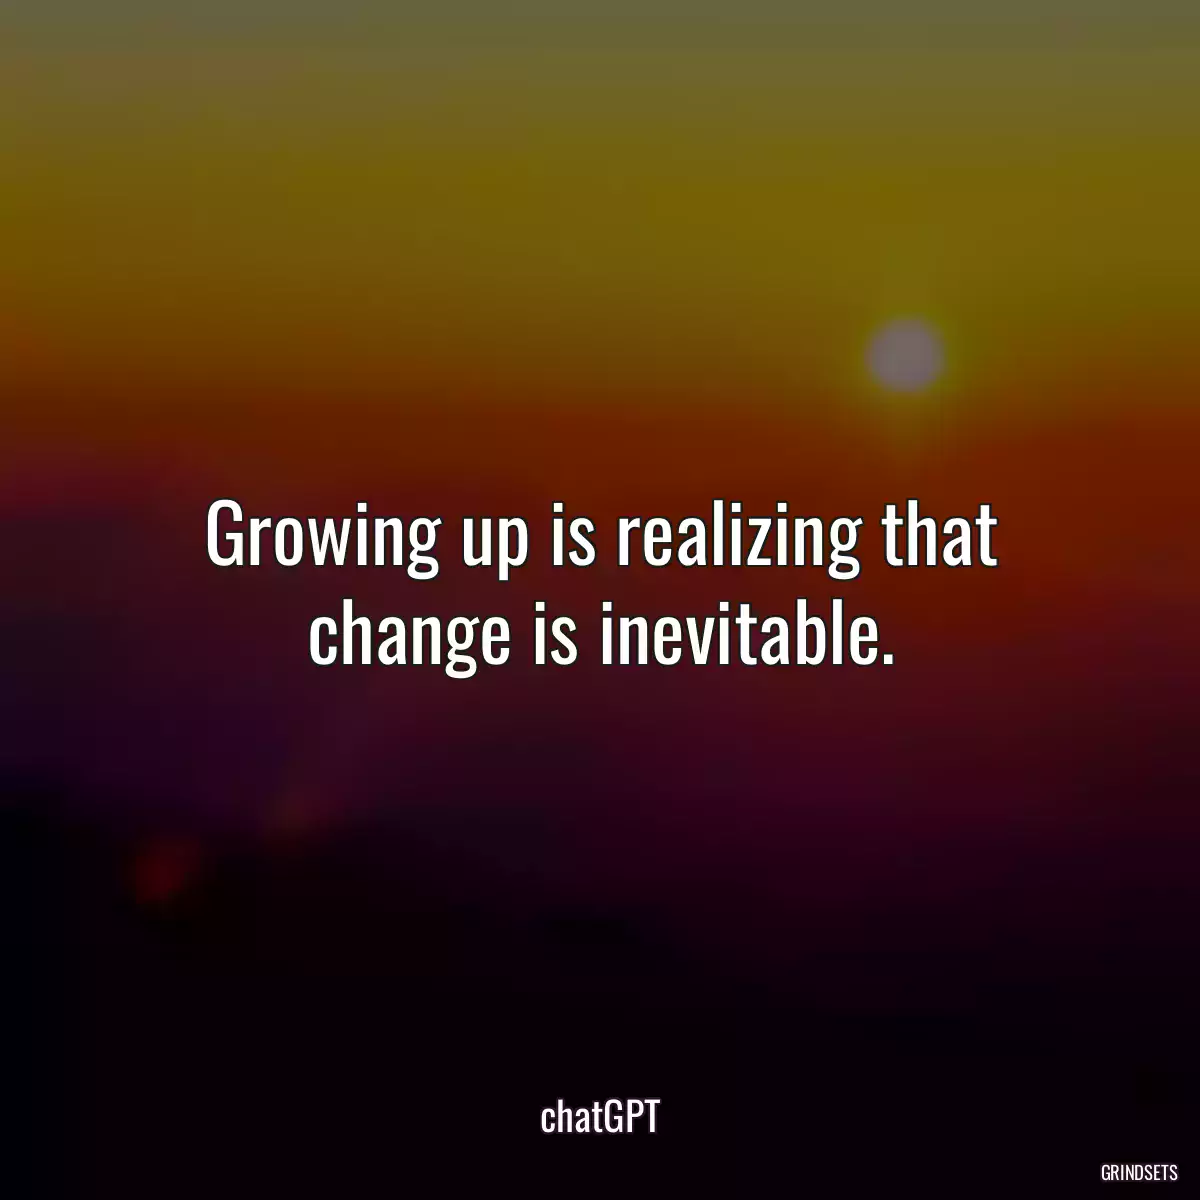 Growing up is realizing that change is inevitable.